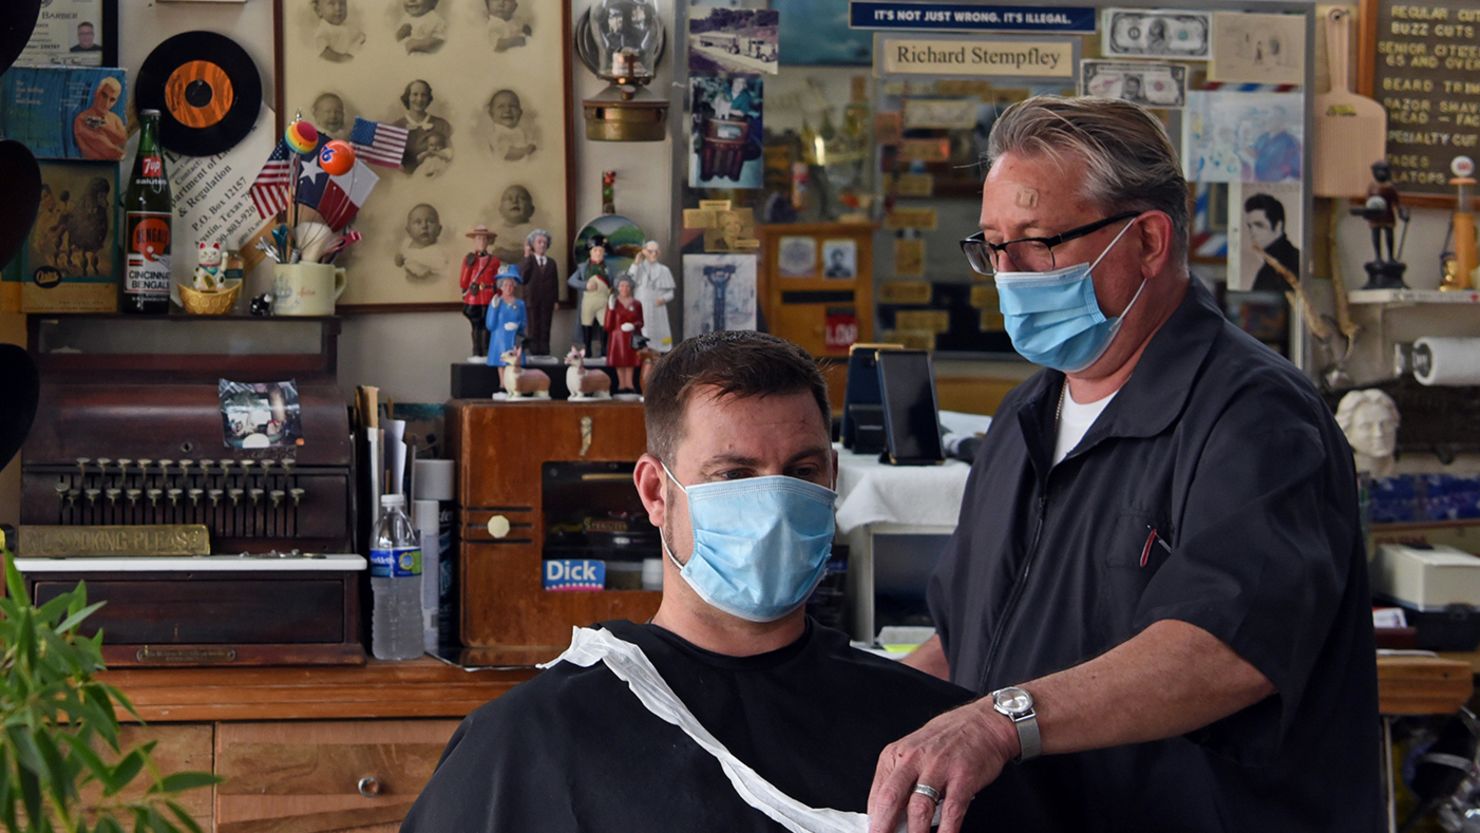 A man receives a haircut at Doug's Barber Shop in Houston on May 8 after social distancing guidelines were relaxed at some businesses.